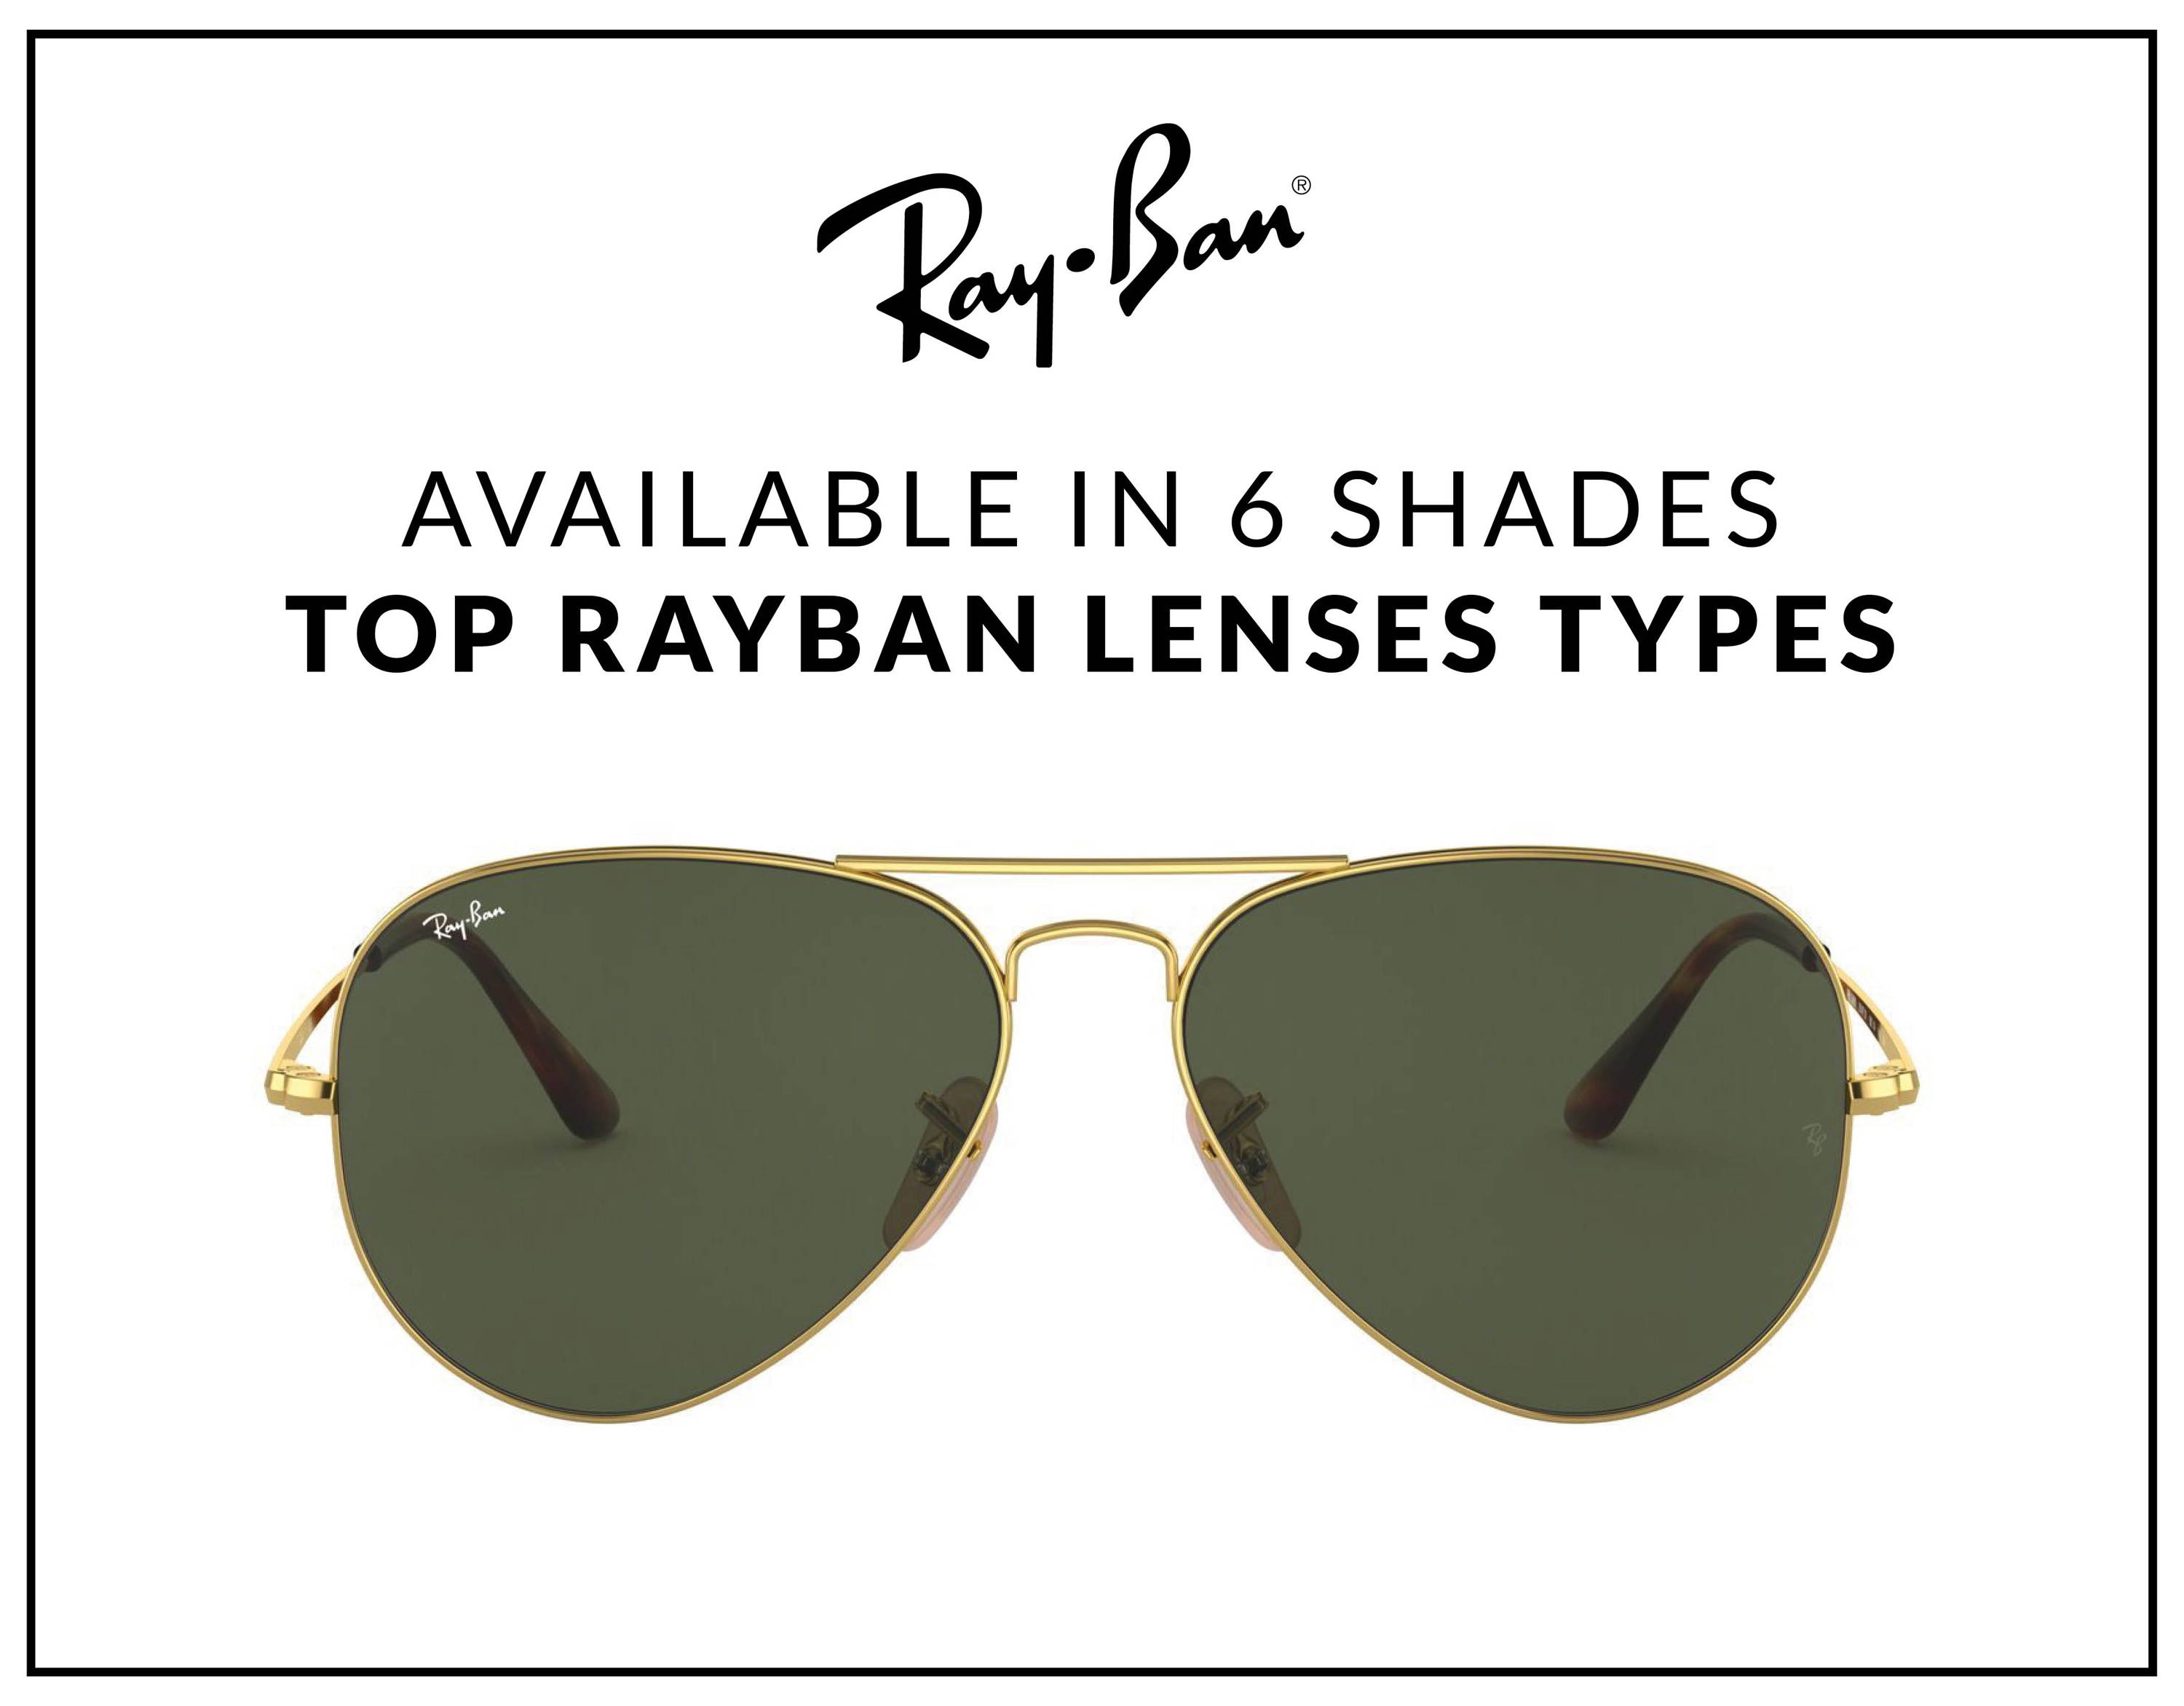 Ray Ban Replacement Parts - shadesdaddy